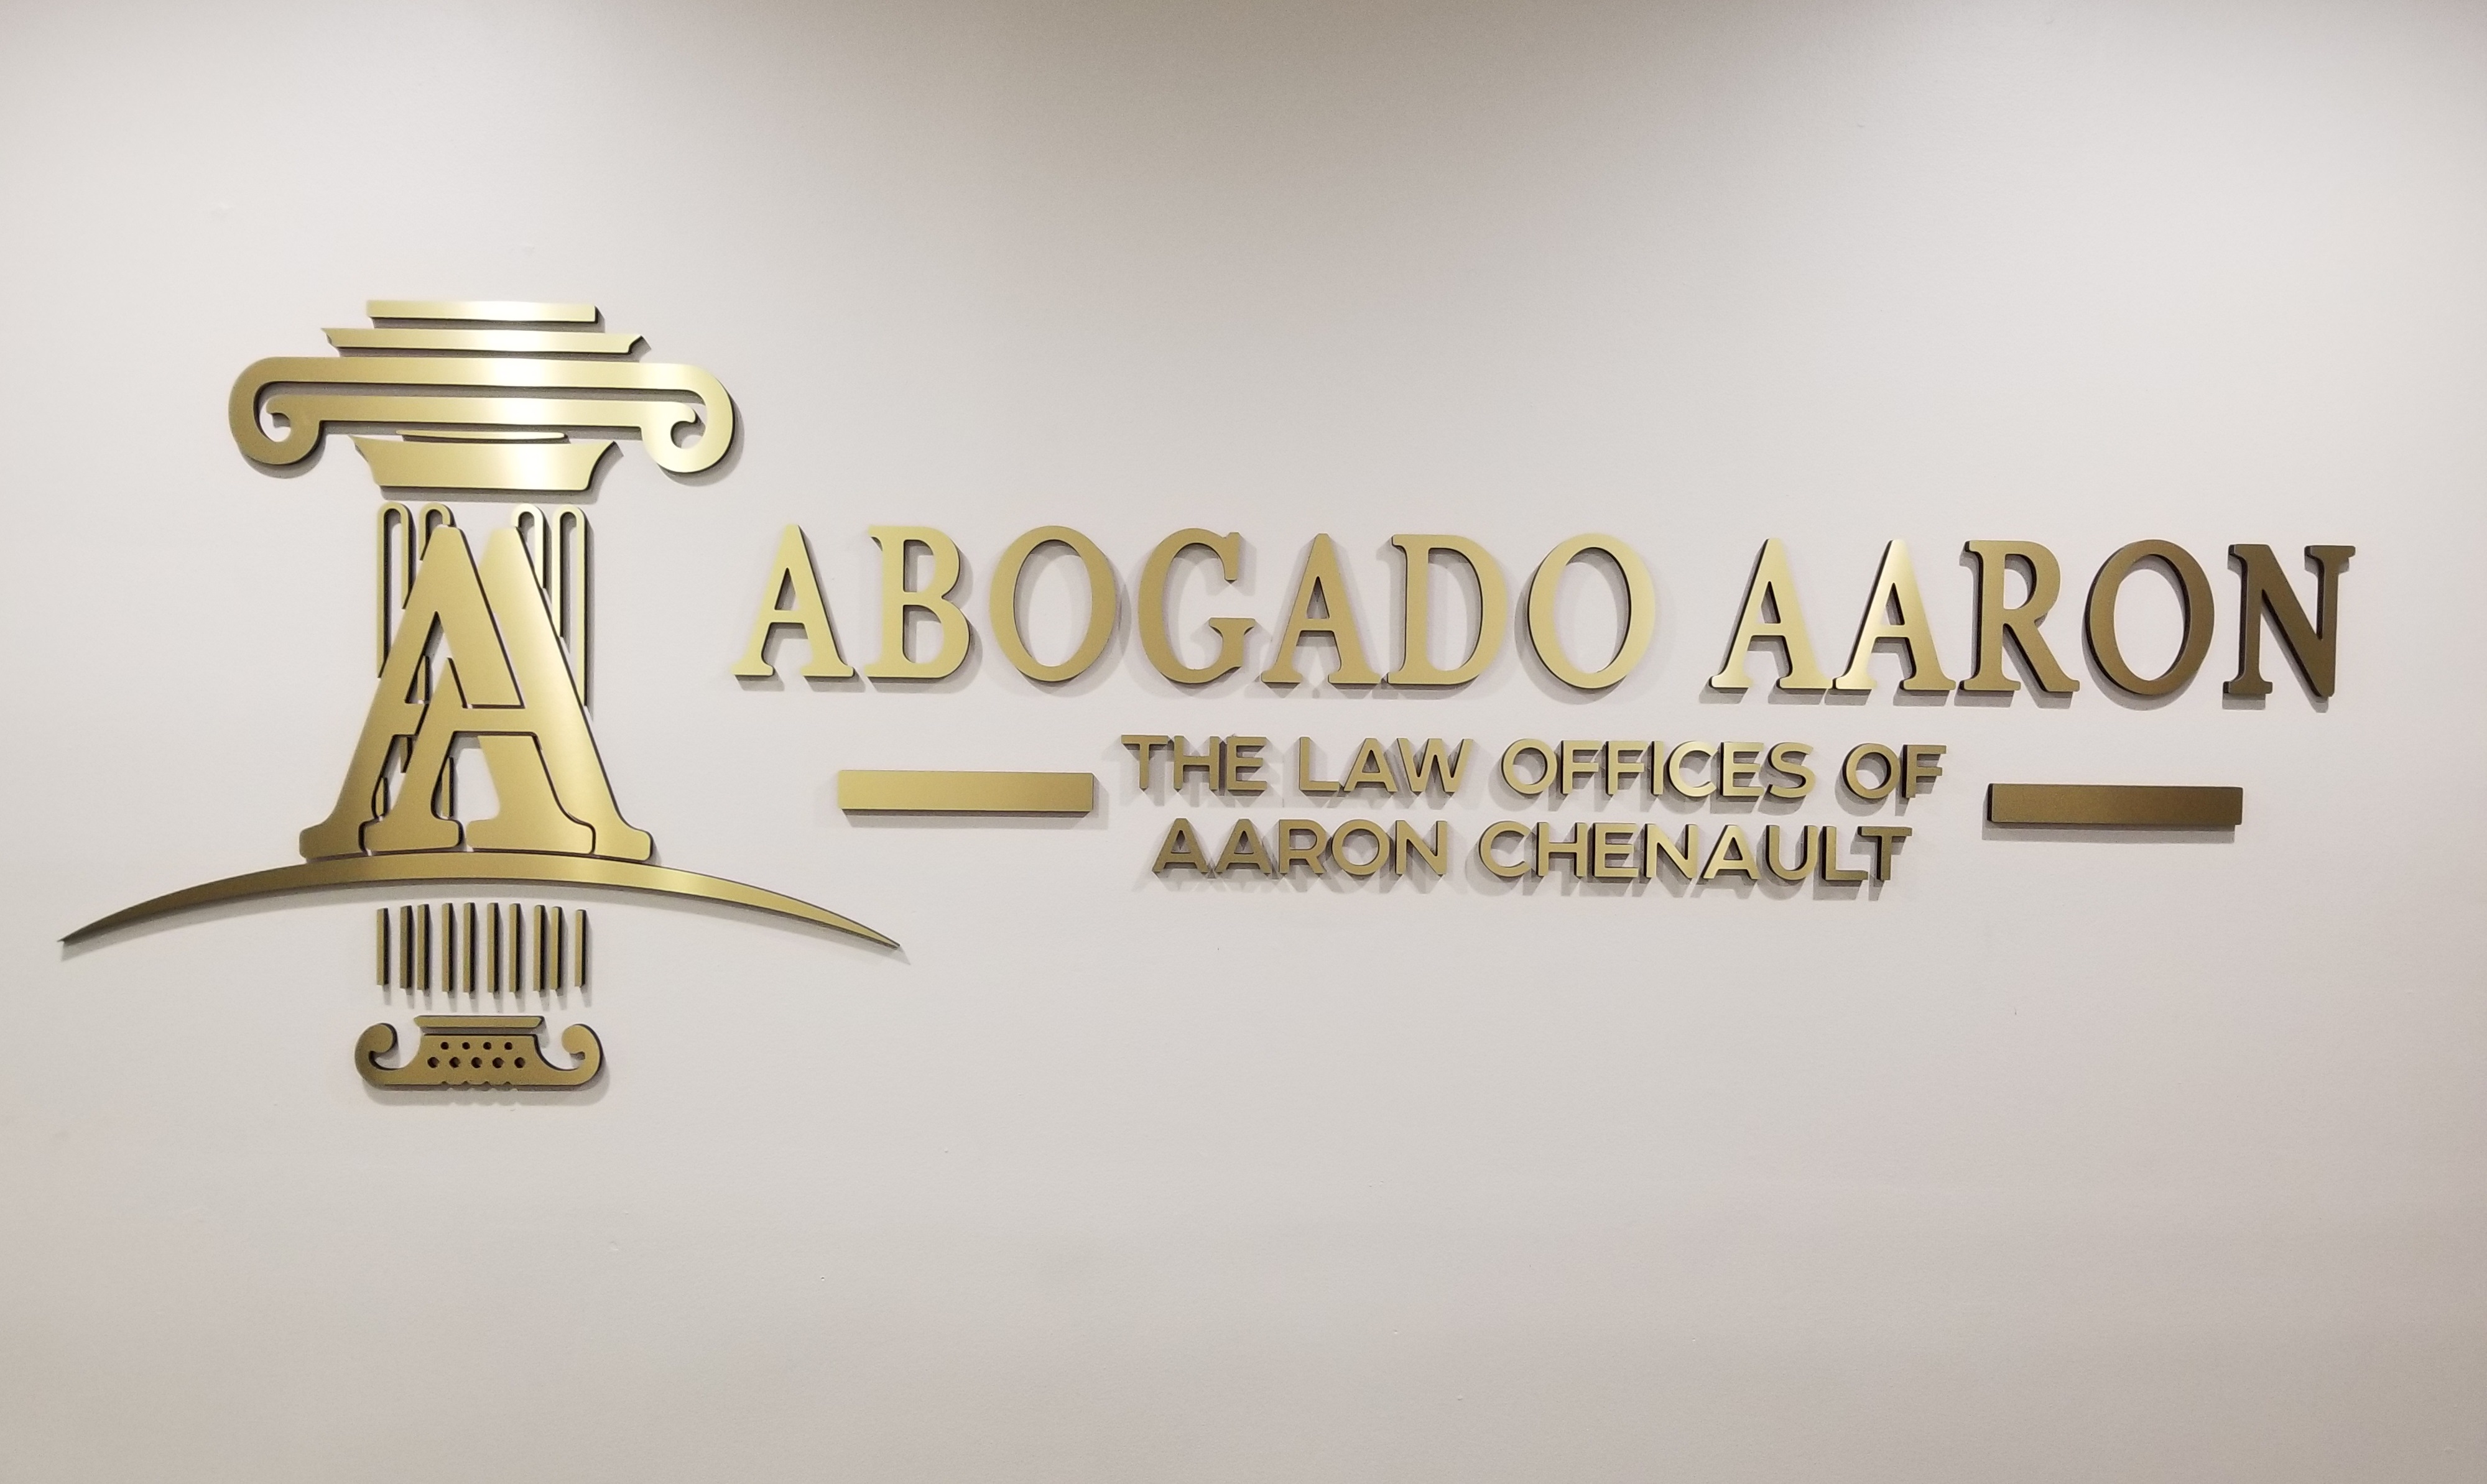 The impressive law office lobby sign we made and installed for Abogado Aaron's Los Angeles branch, conveying the caliber of legal services they provide.